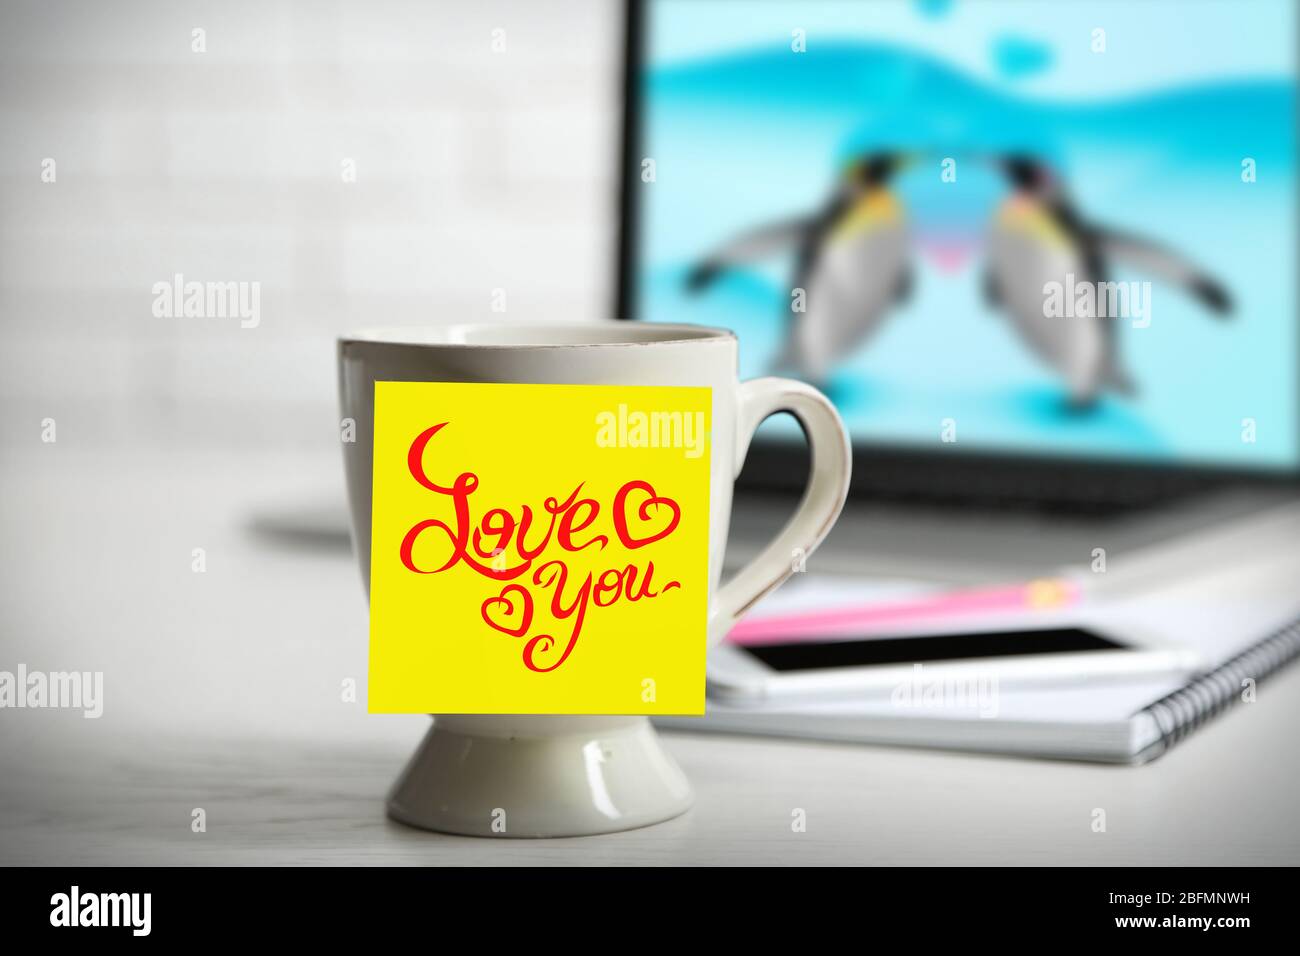 https://c8.alamy.com/comp/2BFMNWH/yellow-adhesive-note-with-drawings-on-coffee-cup-on-laptop-background-2BFMNWH.jpg